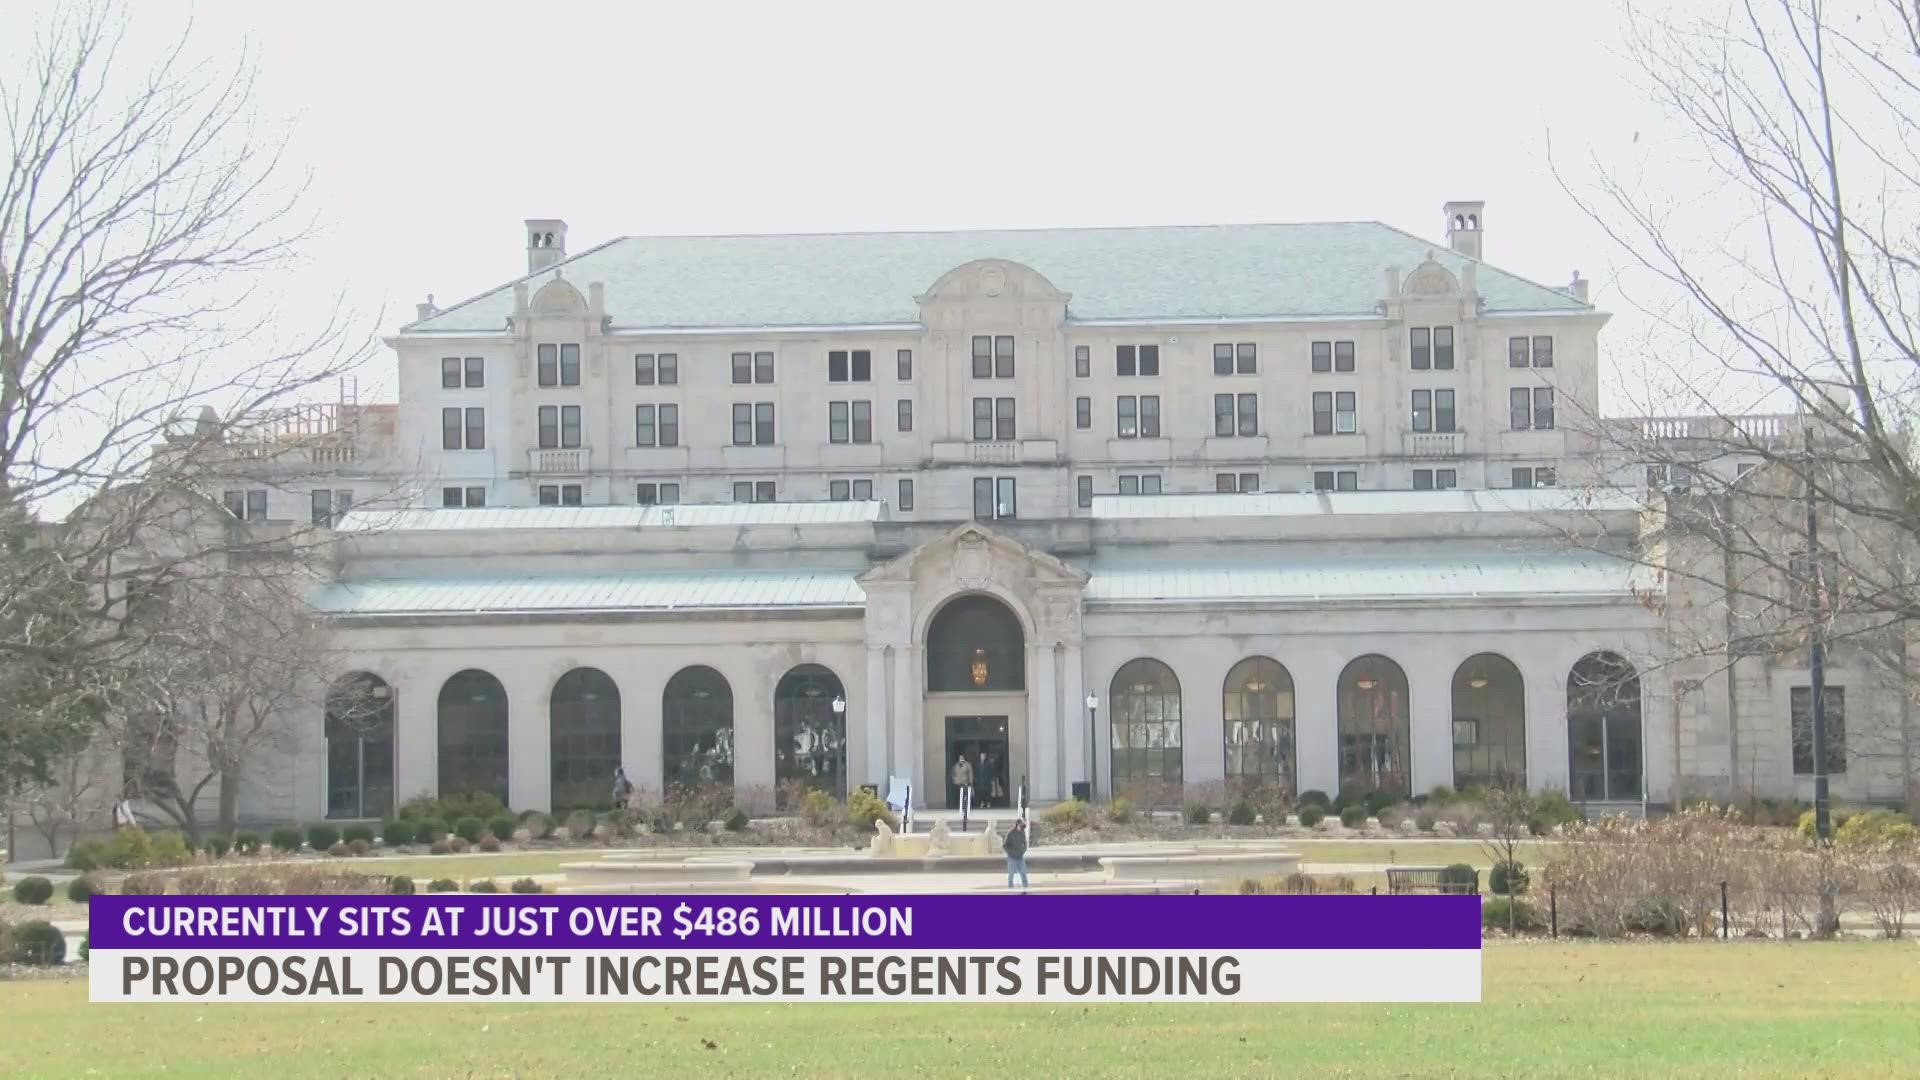 If approved, this would be the third year in a row with no additional funding for the Regents.